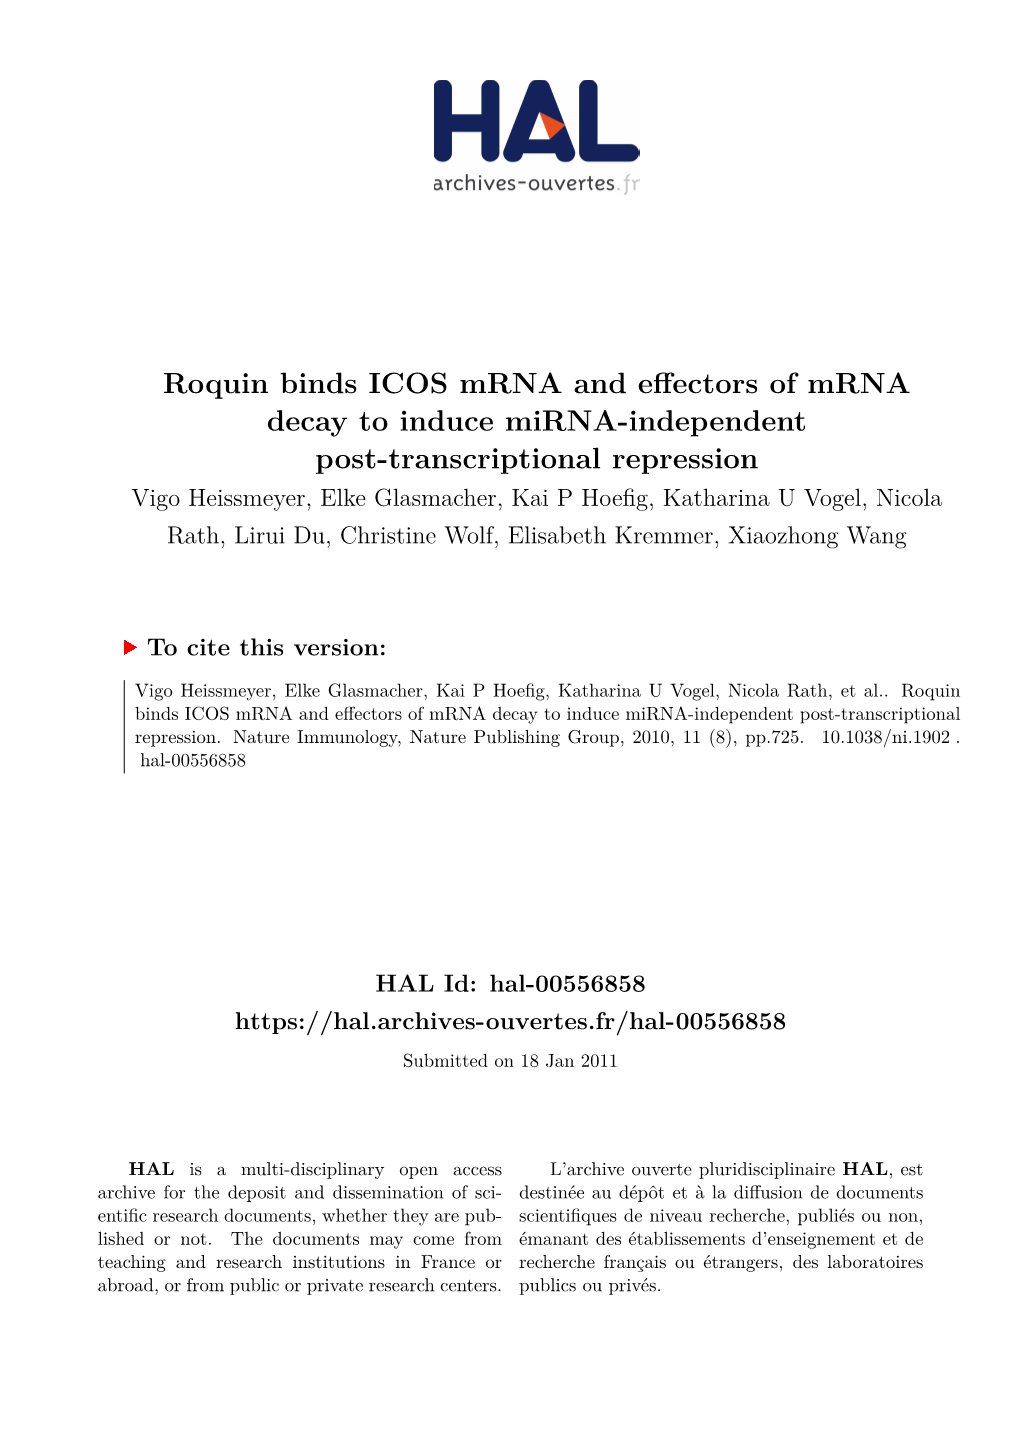 Roquin Binds ICOS Mrna and Effectors of Mrna Decay to Induce